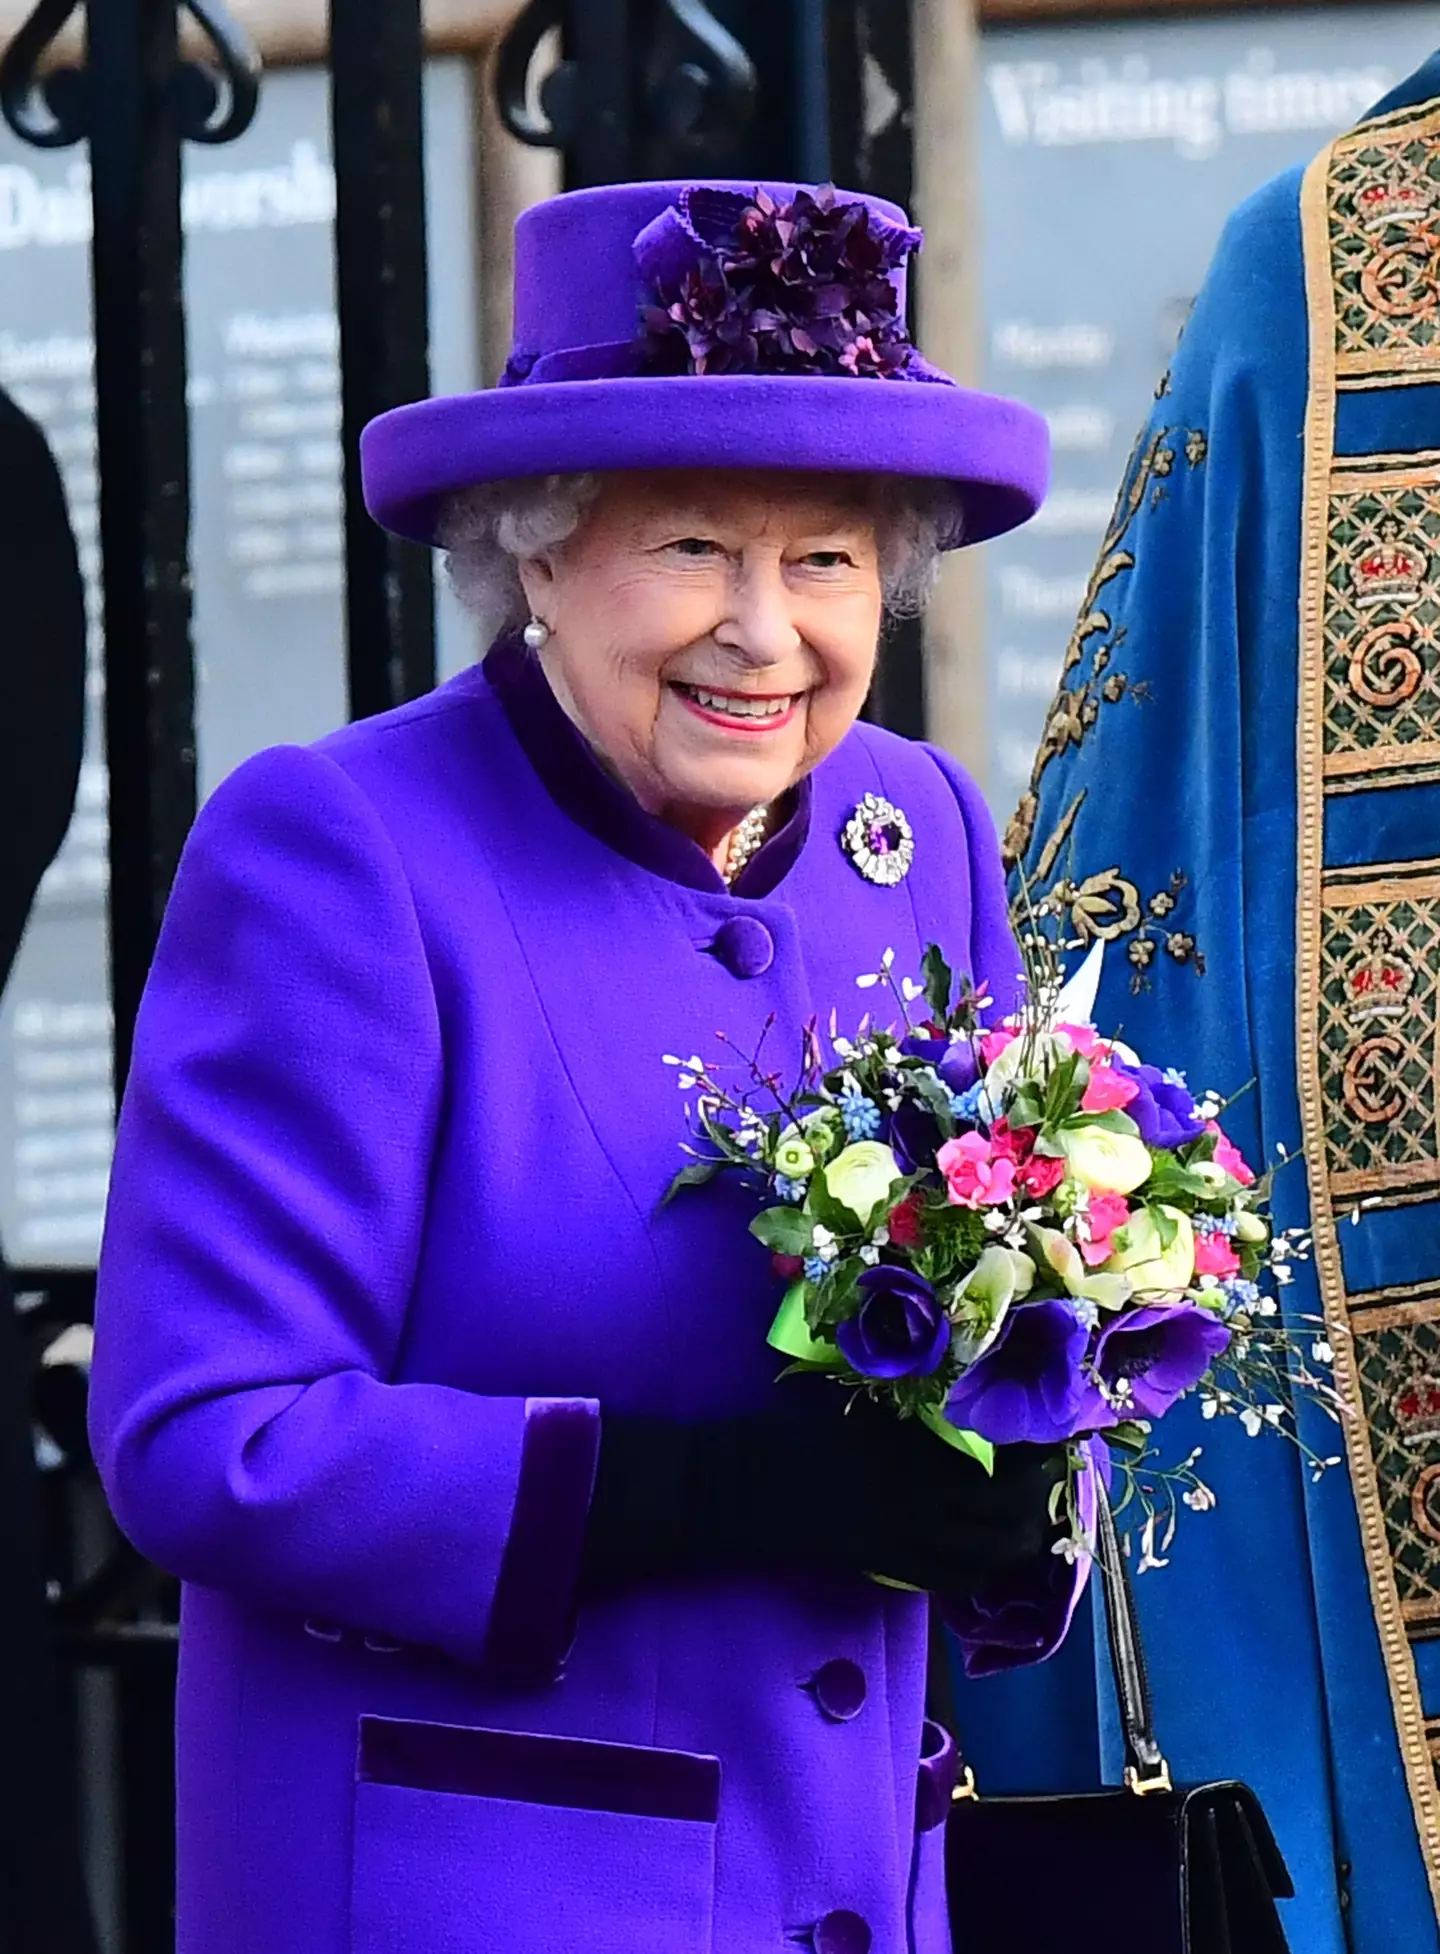 The Queen passed away on Thursday.